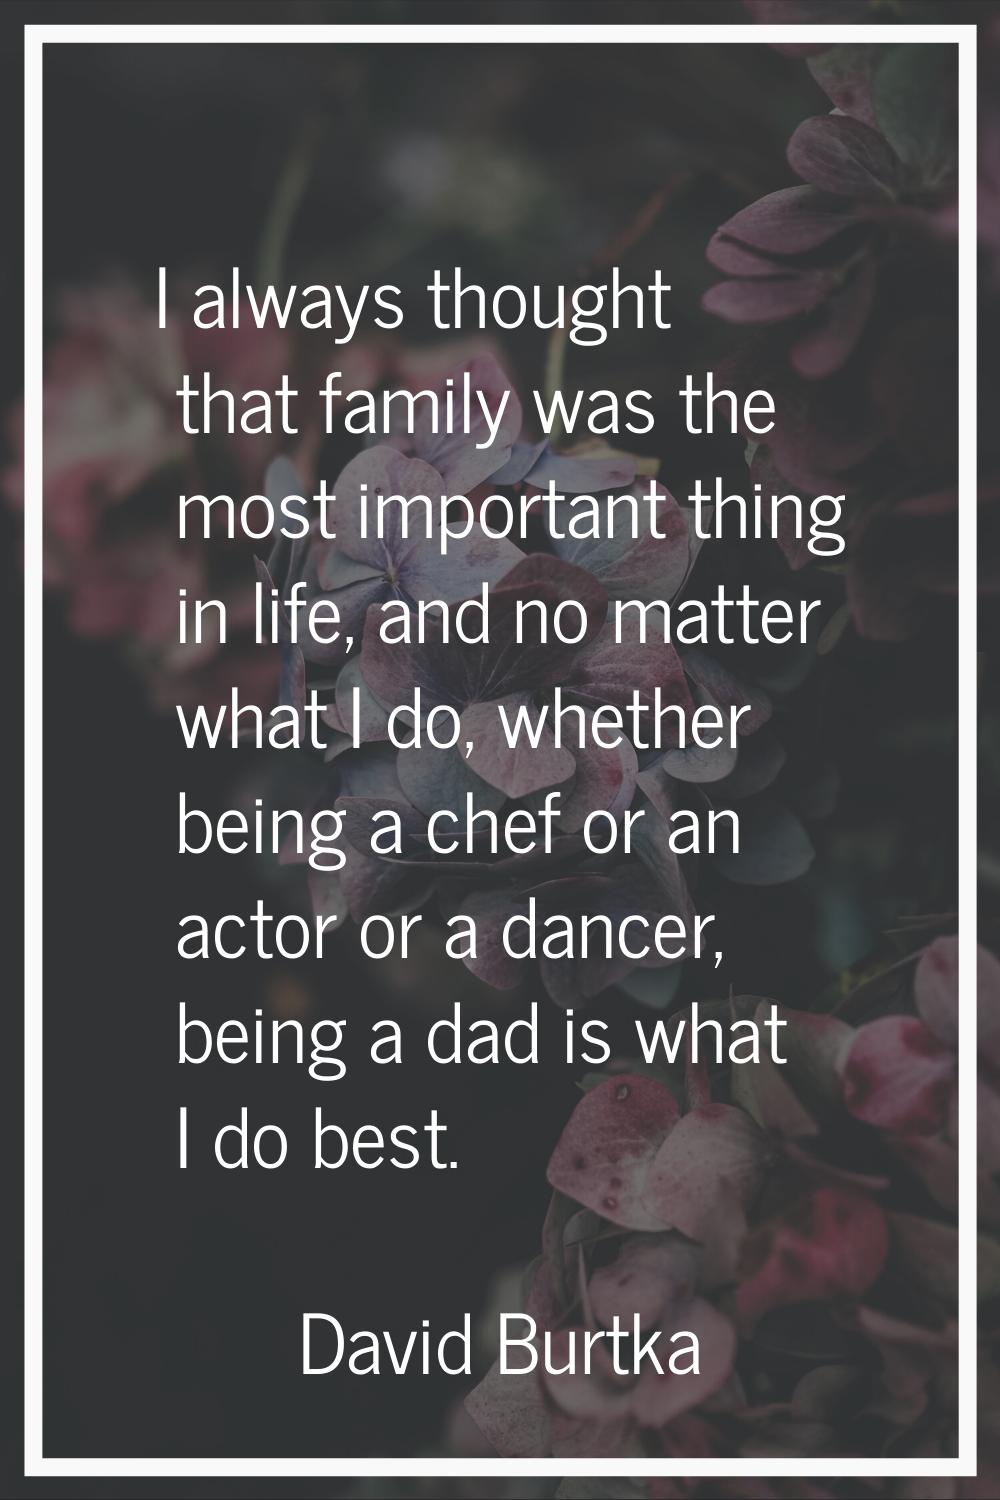 I always thought that family was the most important thing in life, and no matter what I do, whether